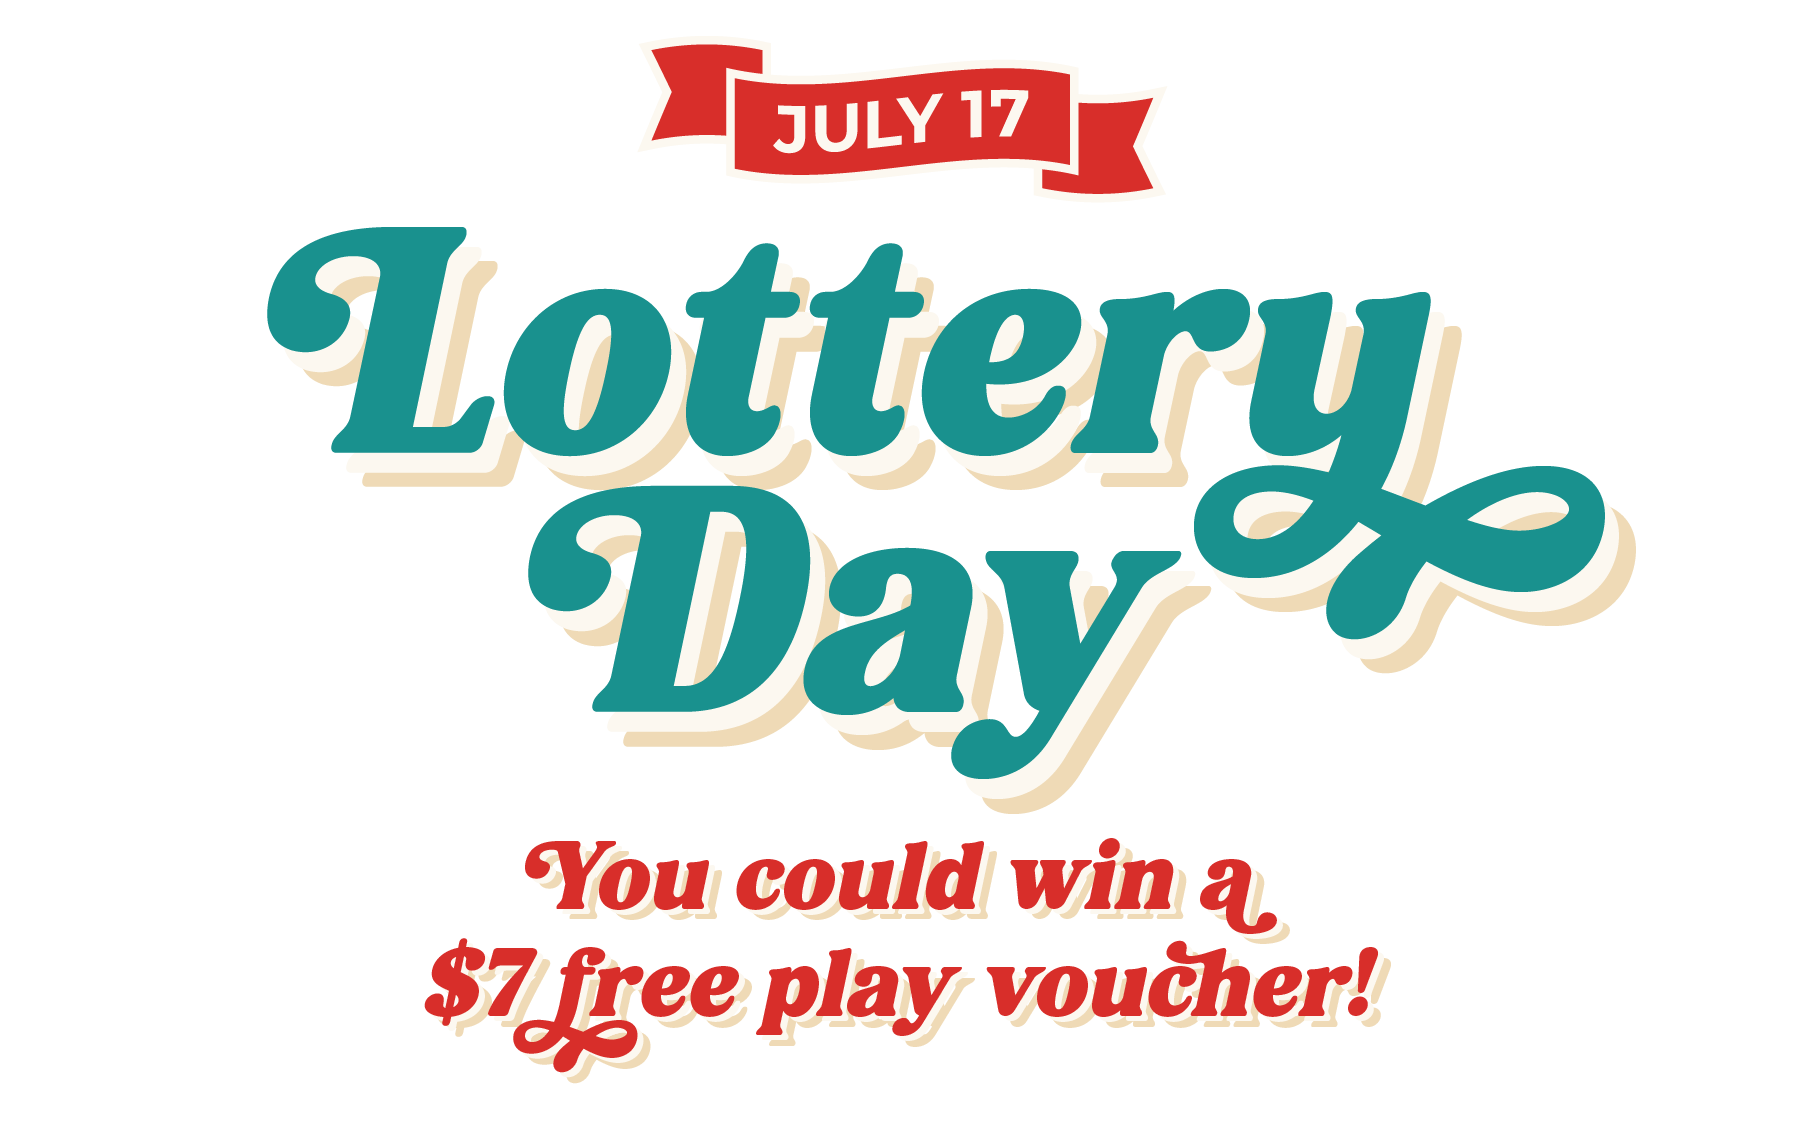 Image reading July 17 Lottery Day You could win a $7 free play voucher!